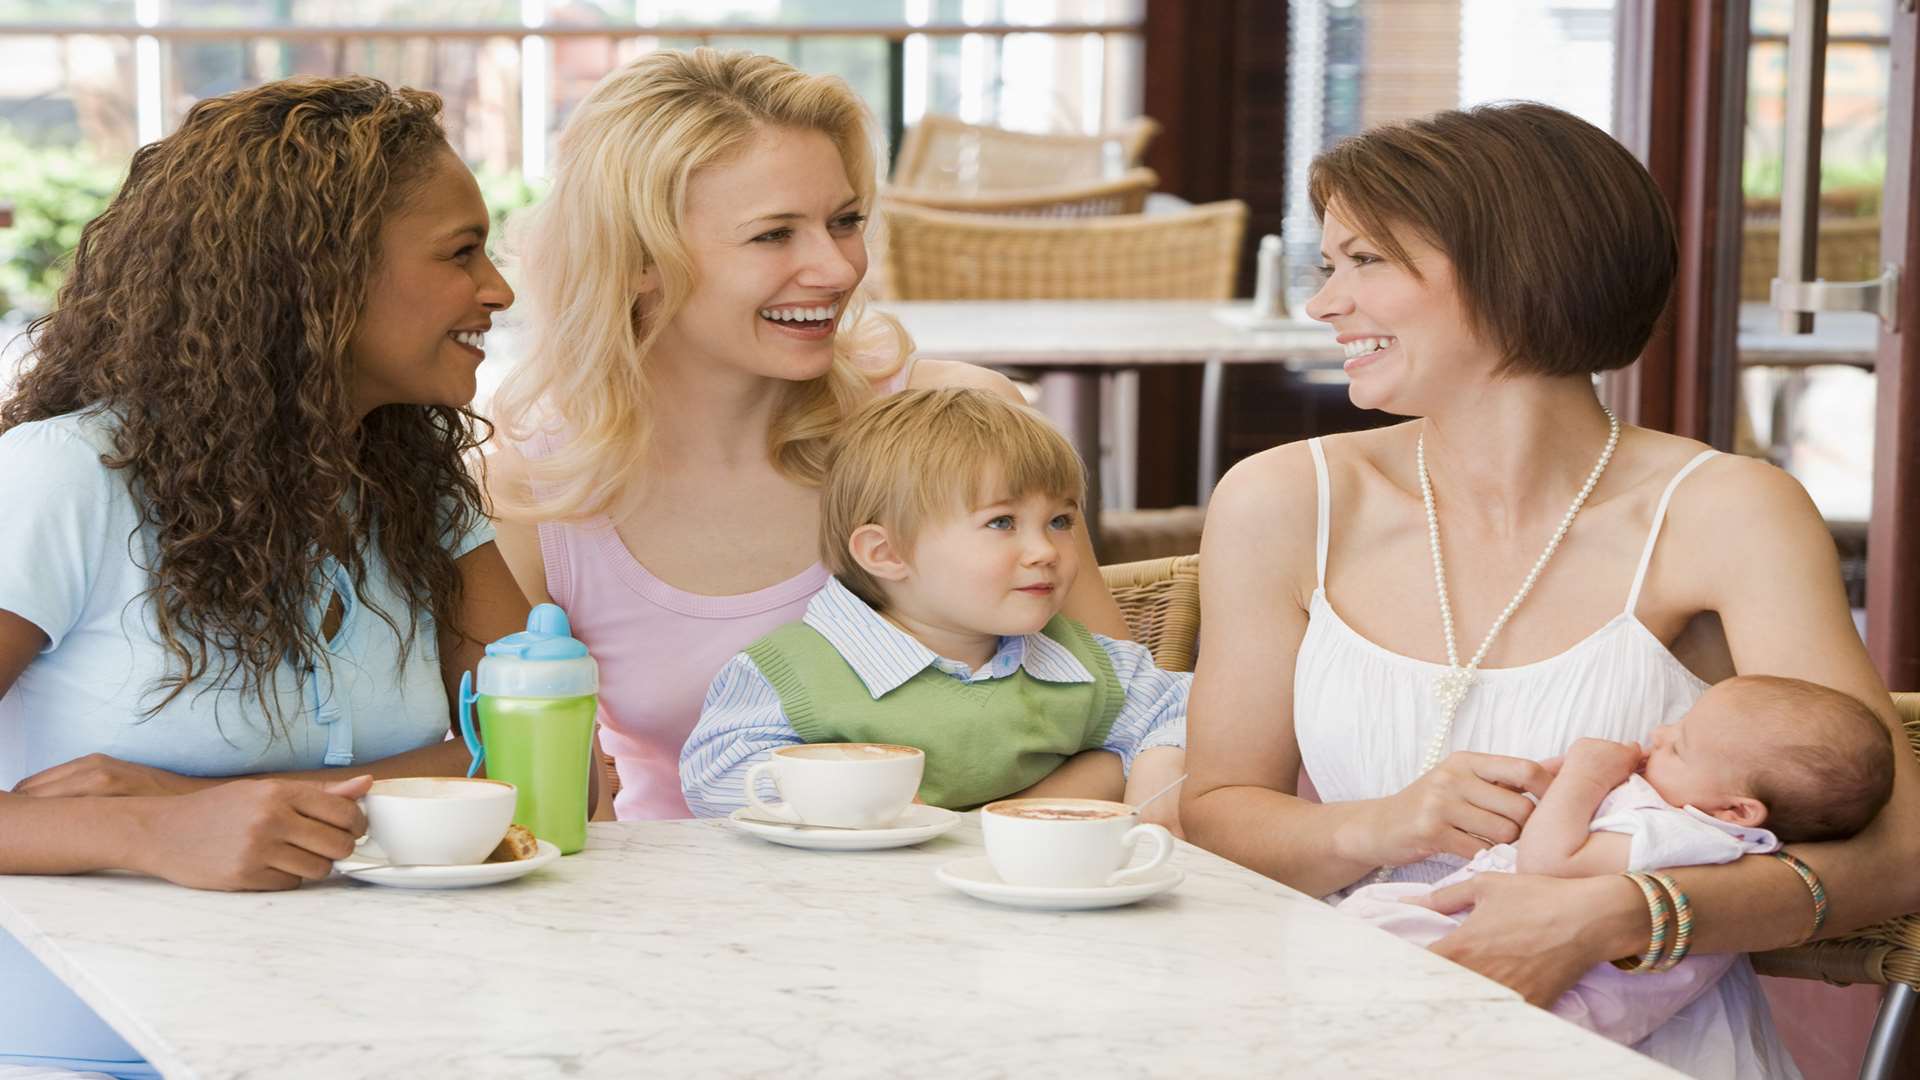 App will put mums in touch for coffee and play dates